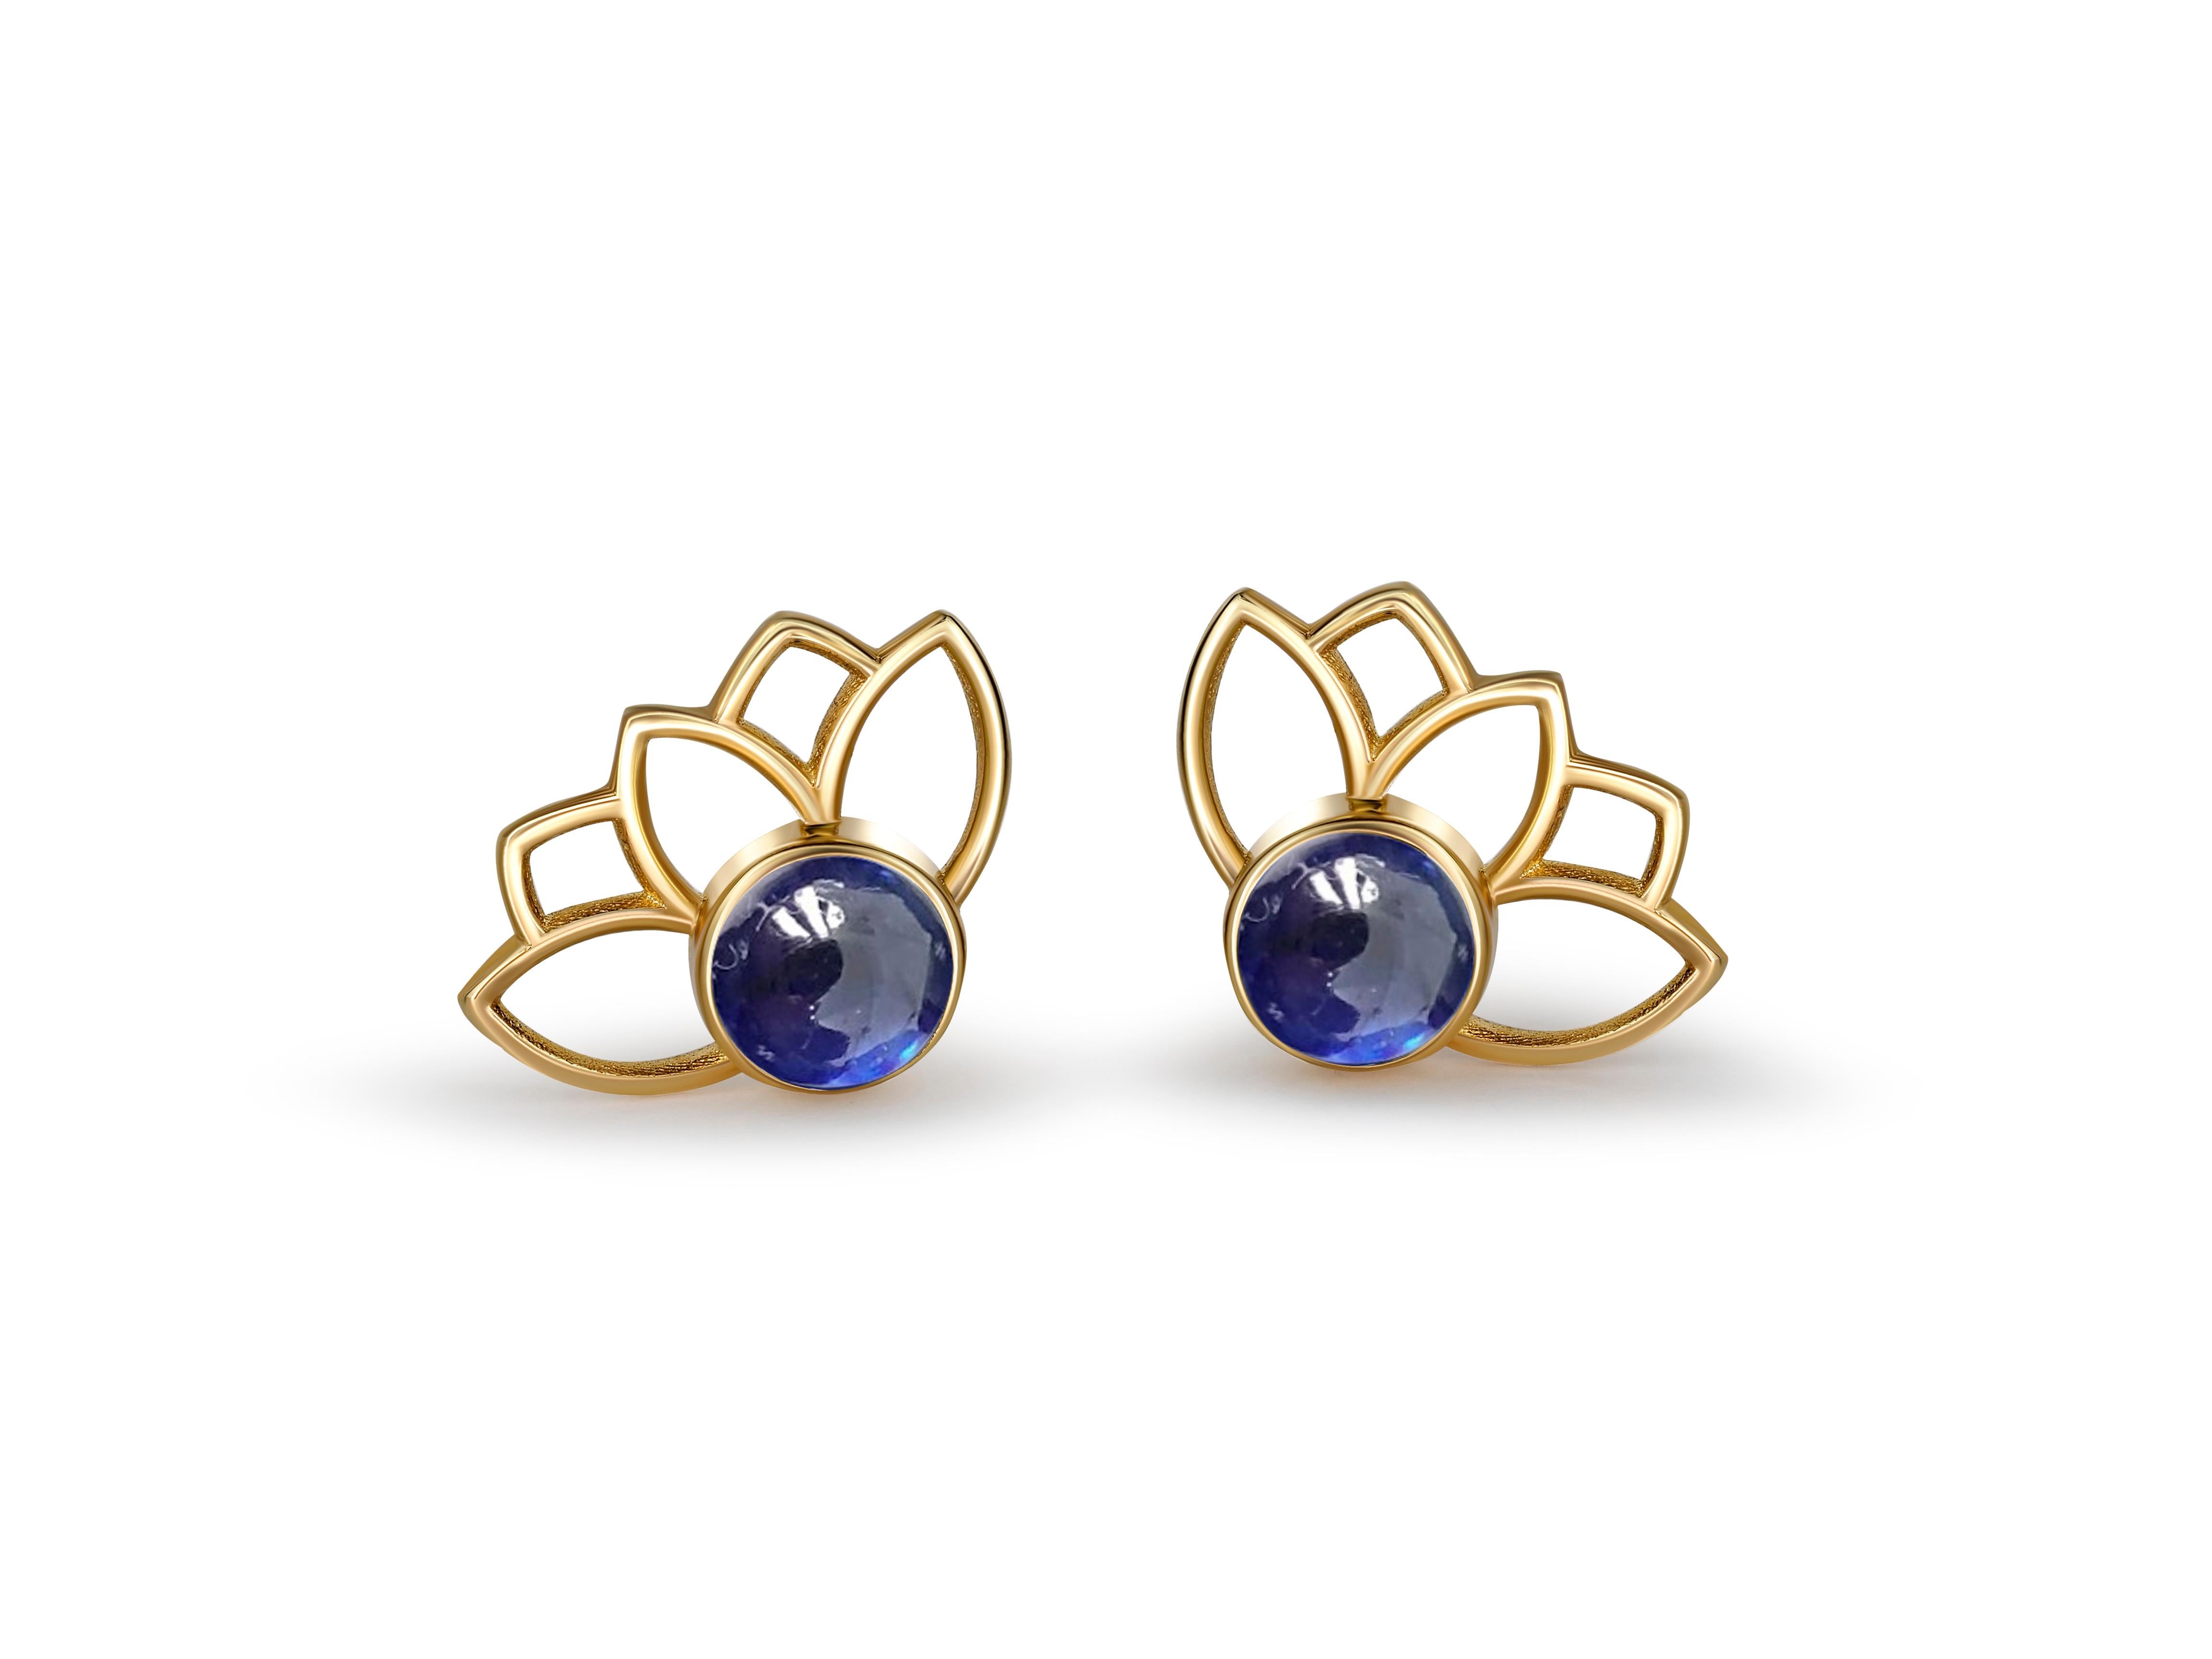 Lotus earrings studs with sapphires in 14k gold. 
Sapphire cabochon earrings. Blue sapphire Gold Earrings. Flower gold earrings.

Metal: 14 karat gold
Weight: 1.5 g.
Size: 11.45 x 8.35 mm.

Set with genuine  sapphires: weight - 0.45 ct x 2 = 0.90 ct